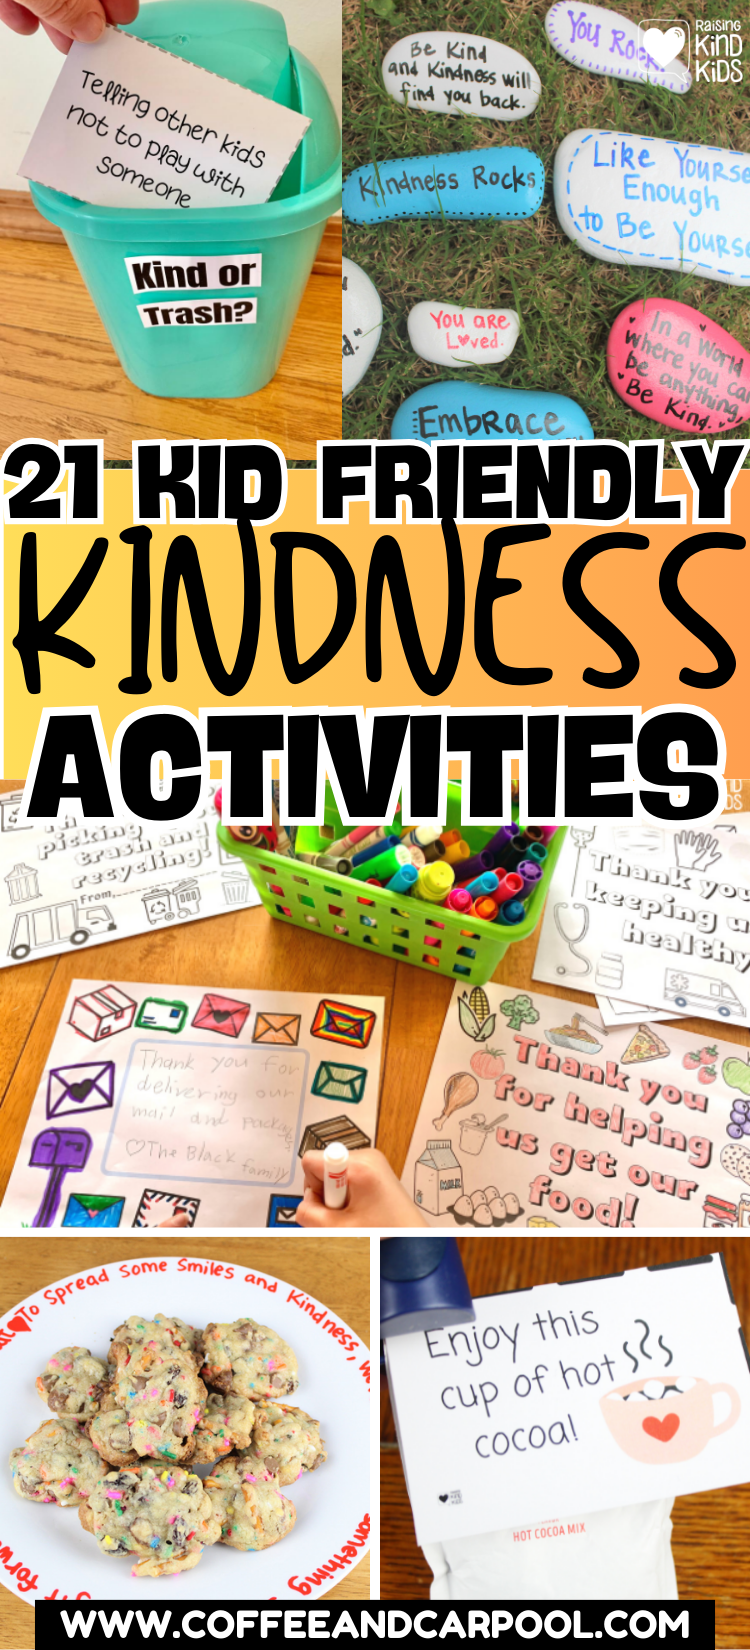 Use these kindness activities for kids to give kids ways they can speak and act with kindness more often in fun ways. 